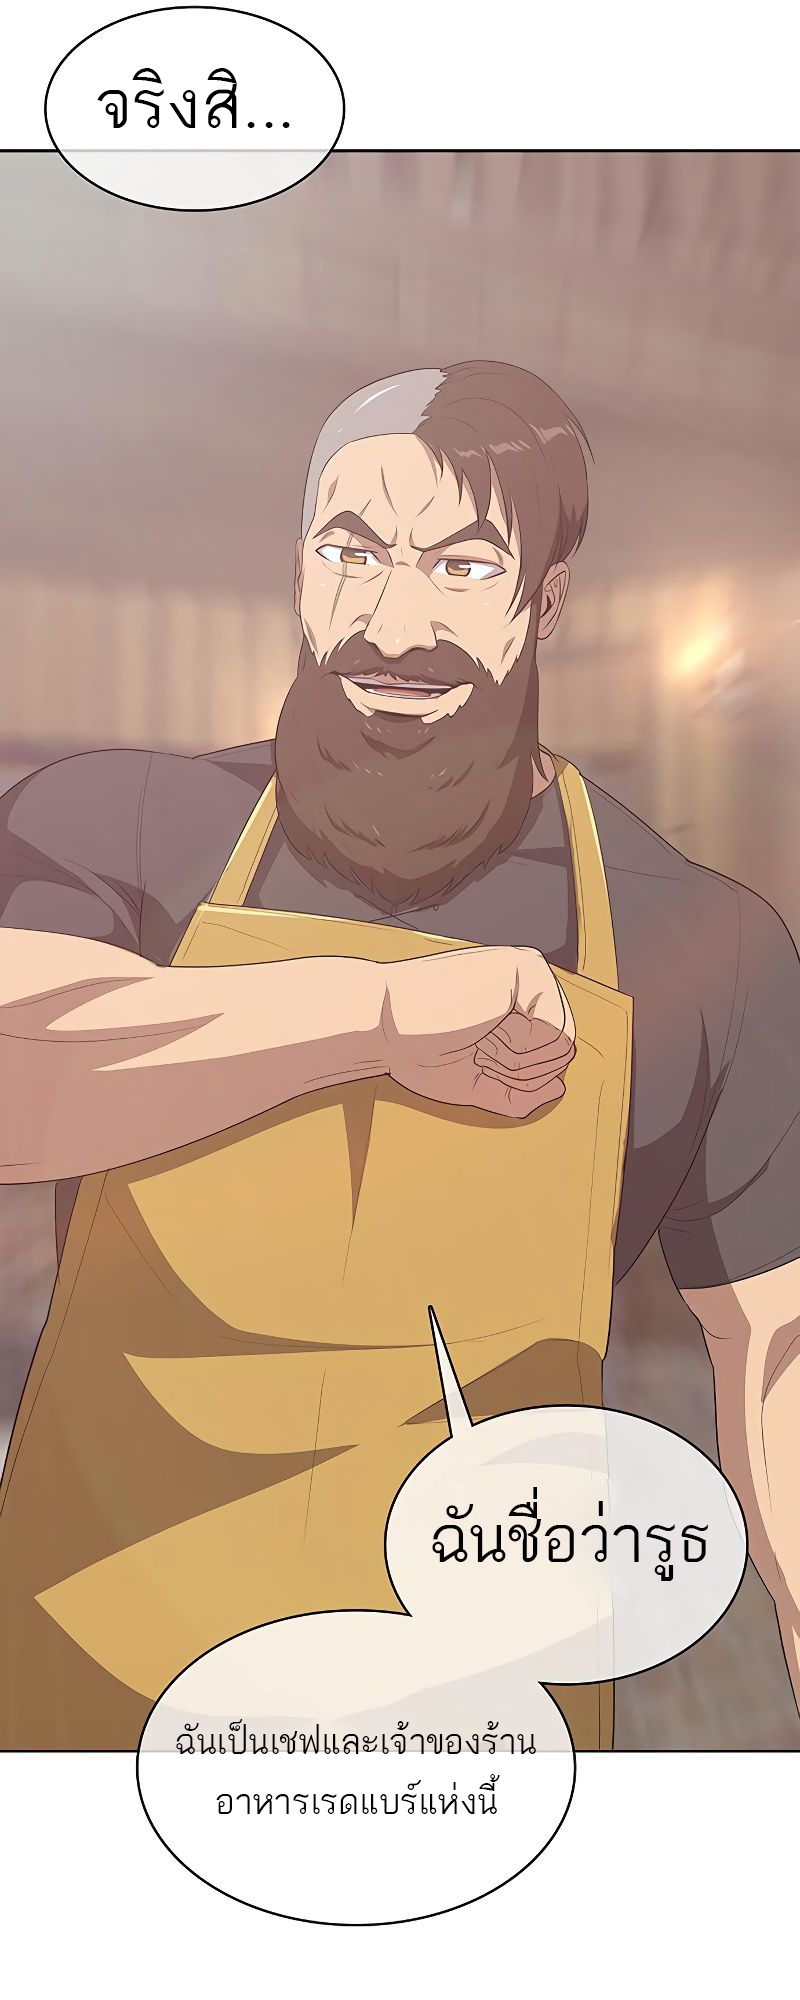 The Strongest Chef in Another World 8 18 03 25670070